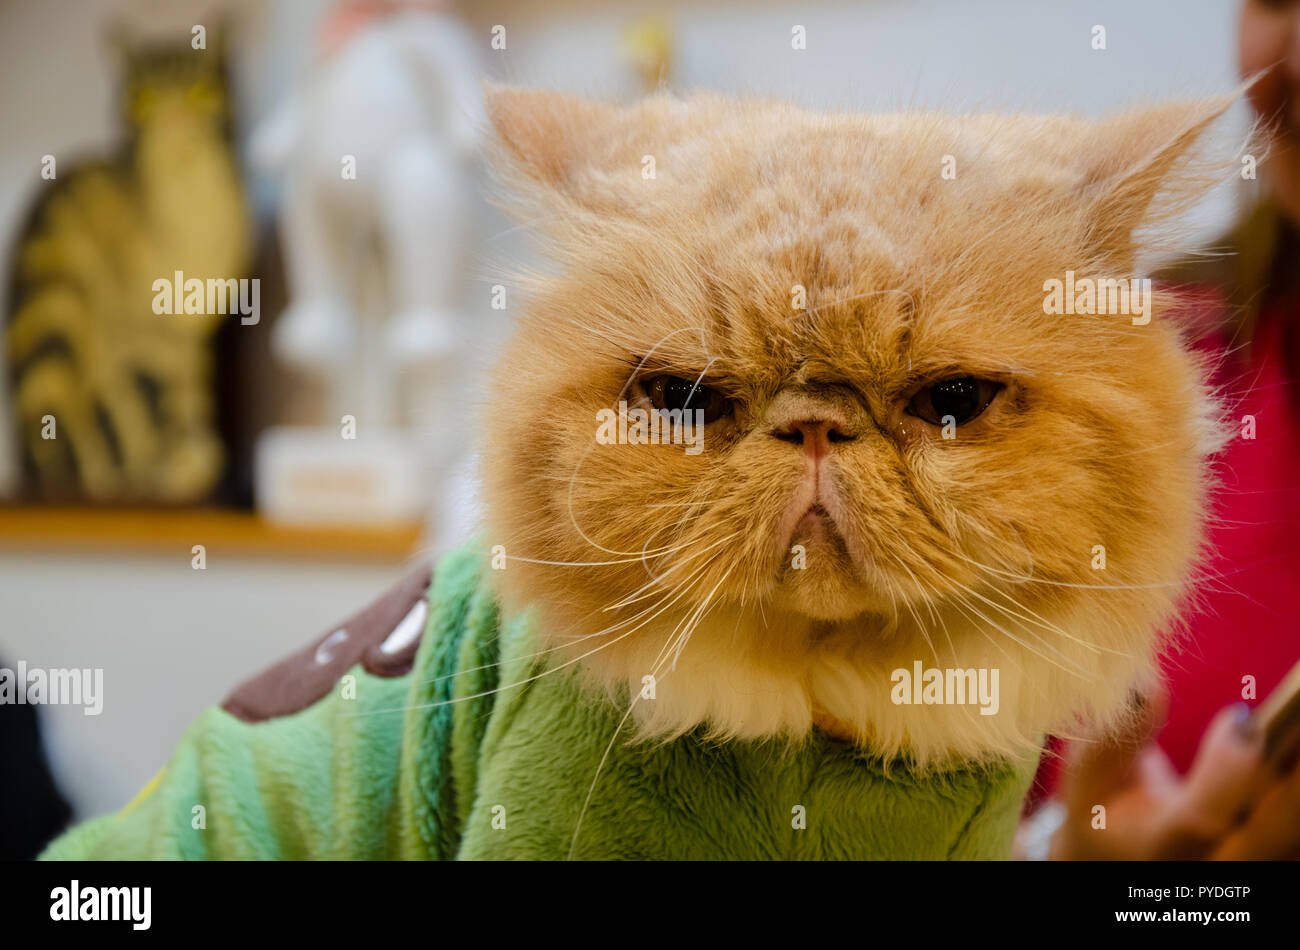 A cat wearing a green jumper in a cat cafe in Myeongdong in Seoul, South Korea. Stock Photo